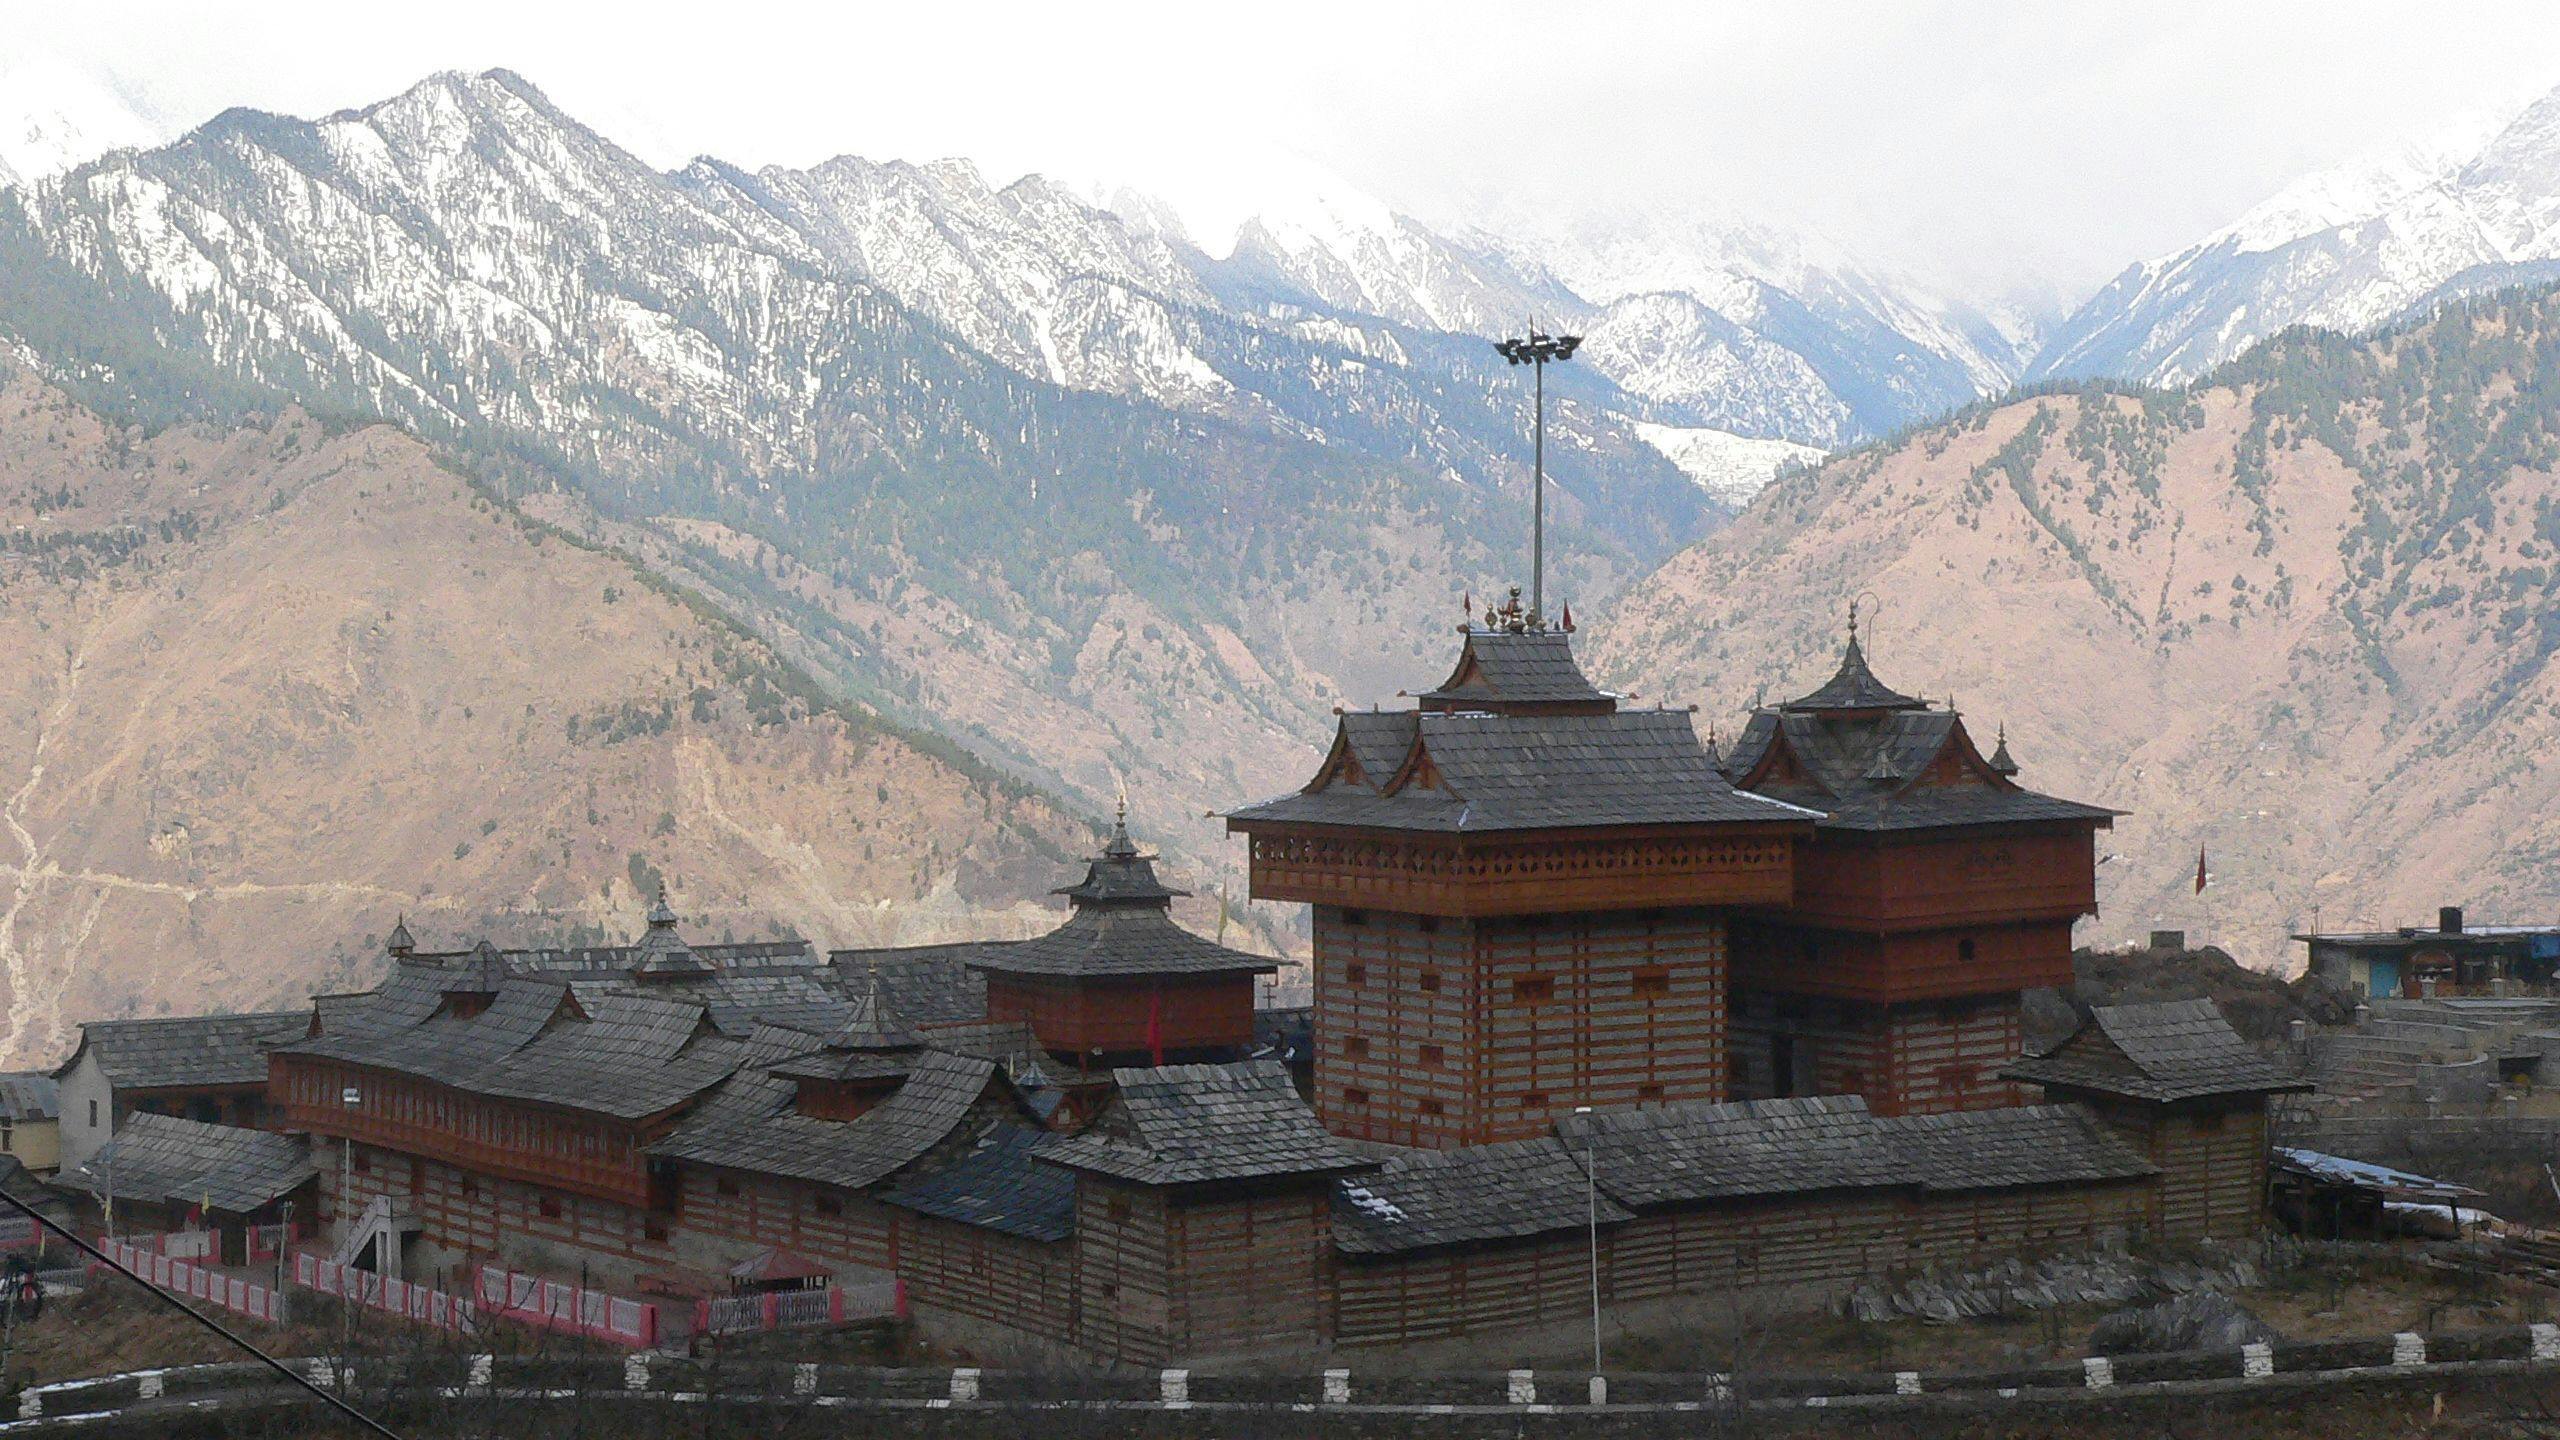 Mesmerizing view of the Bhimakali Temple at Sarahan